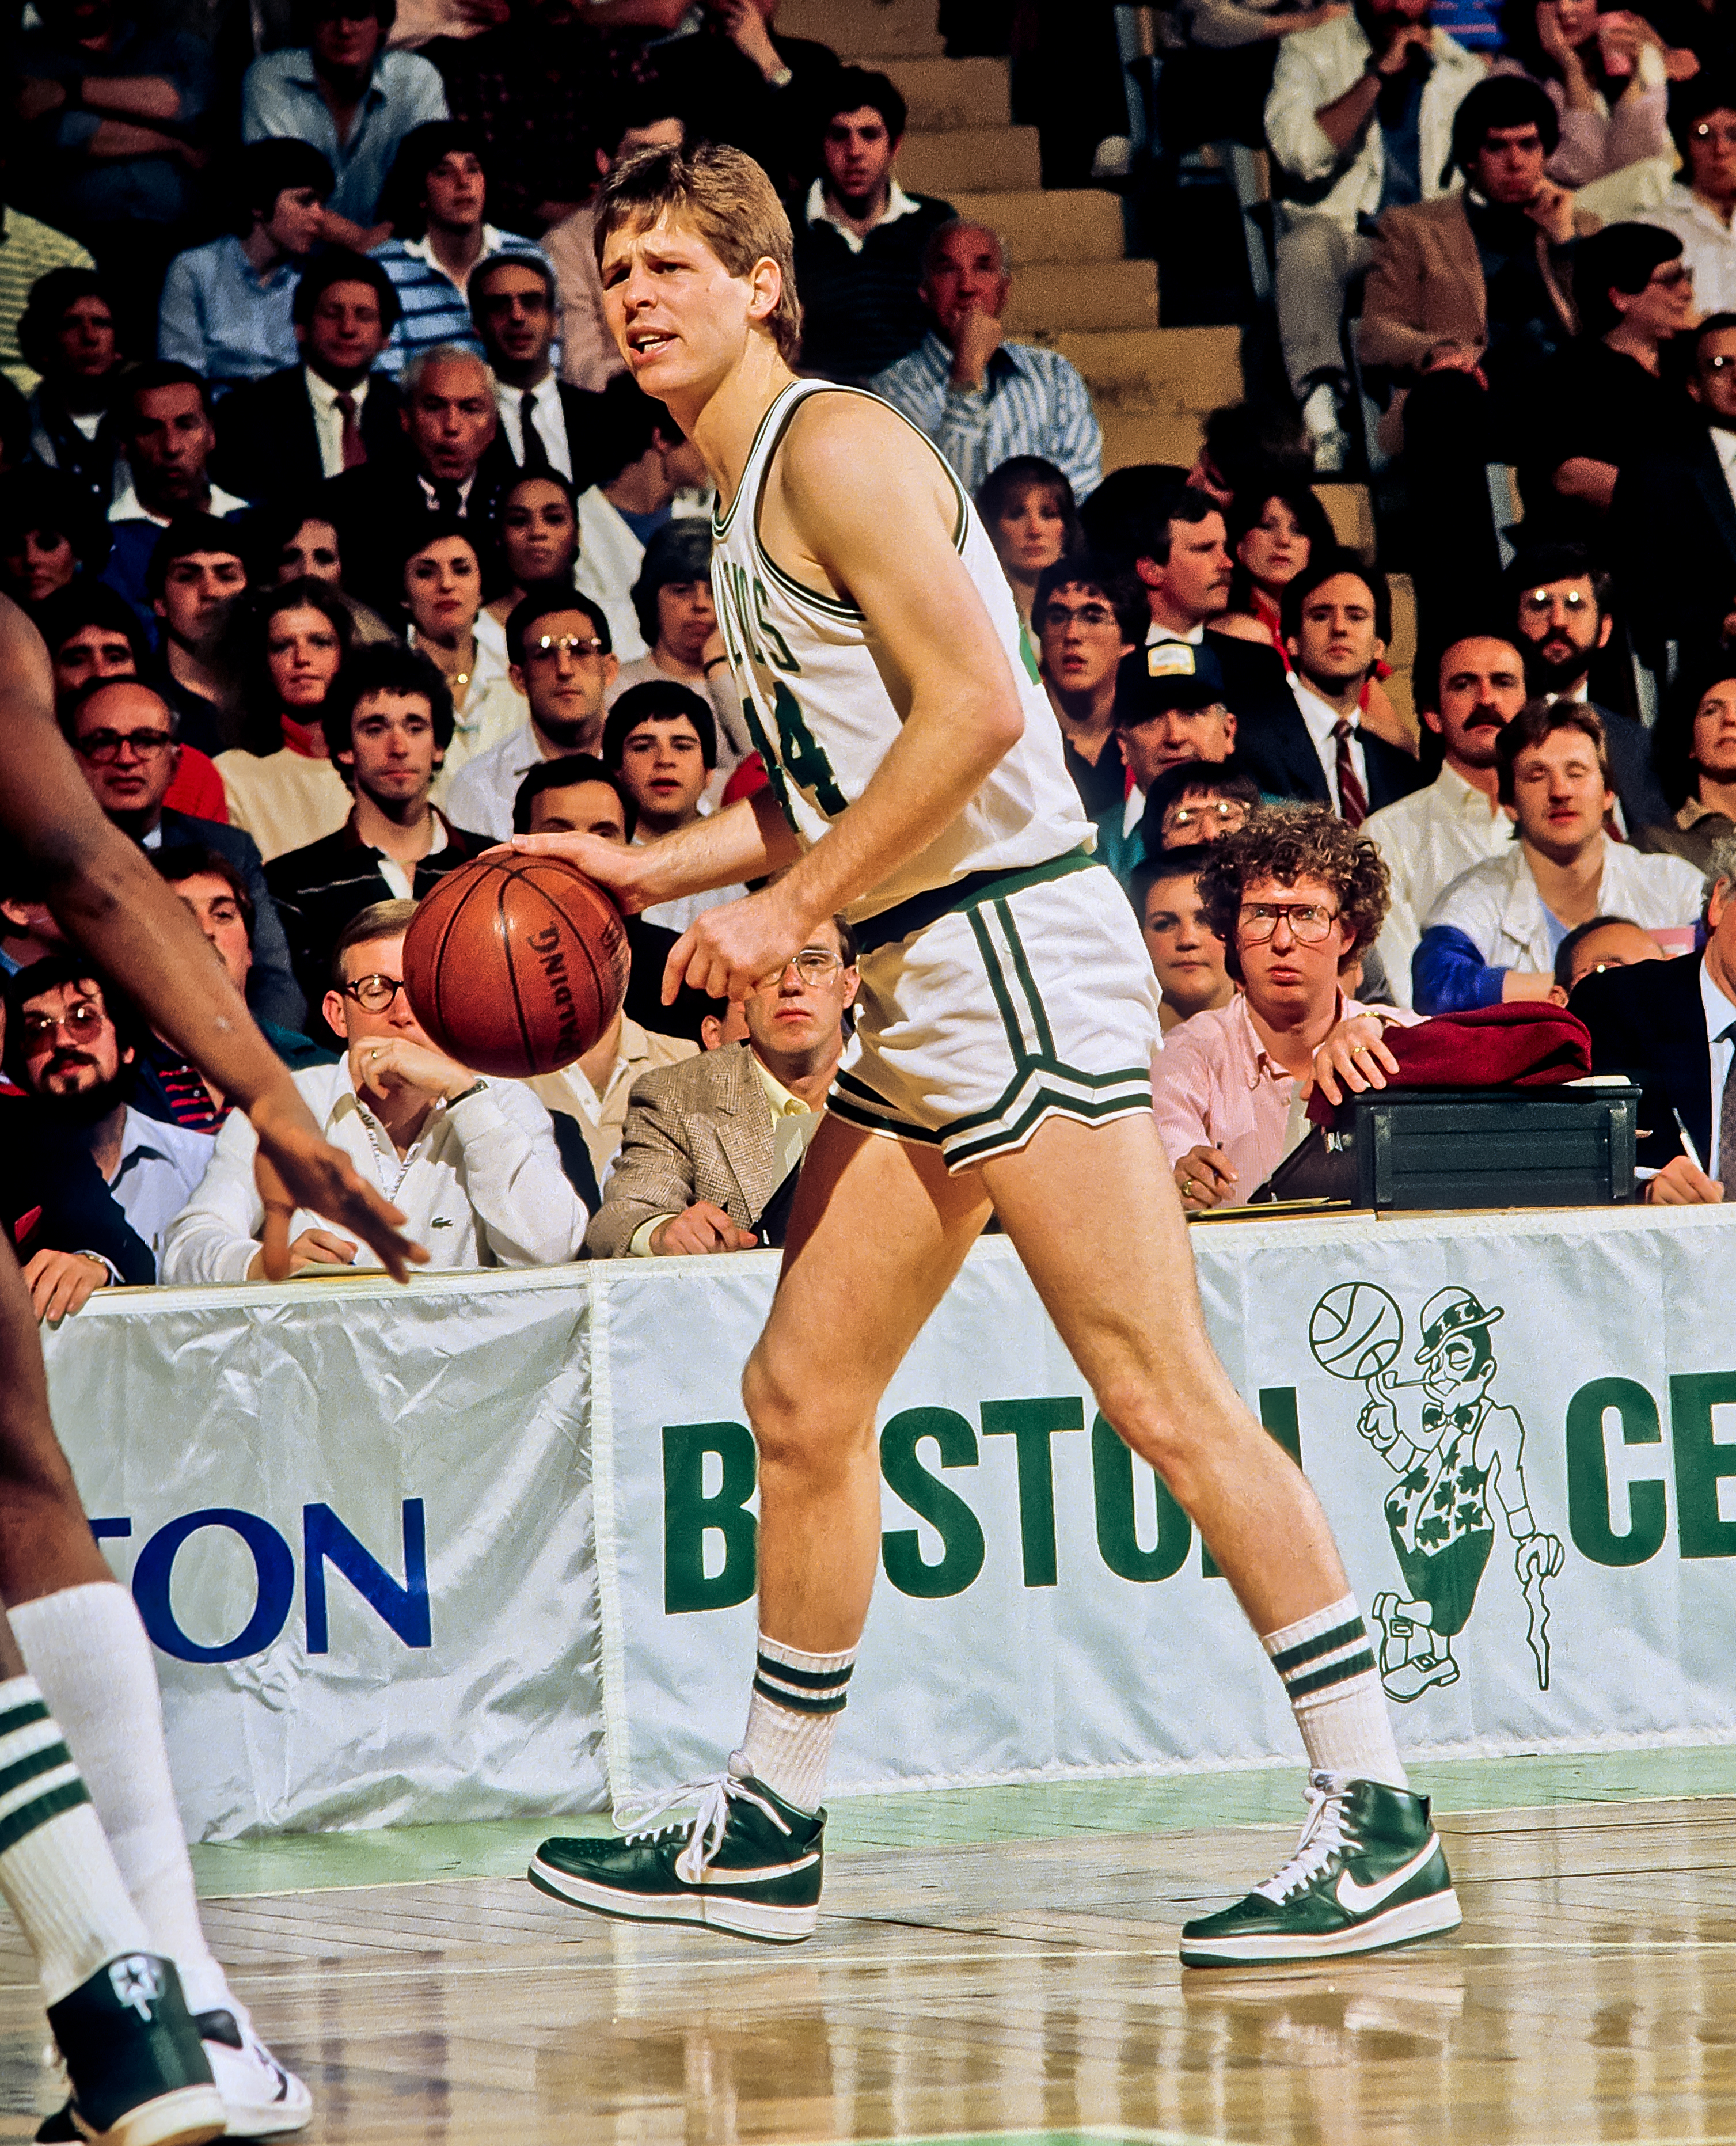 Dan Shaughnessy book excerpt: The time Larry Bird hustled me out